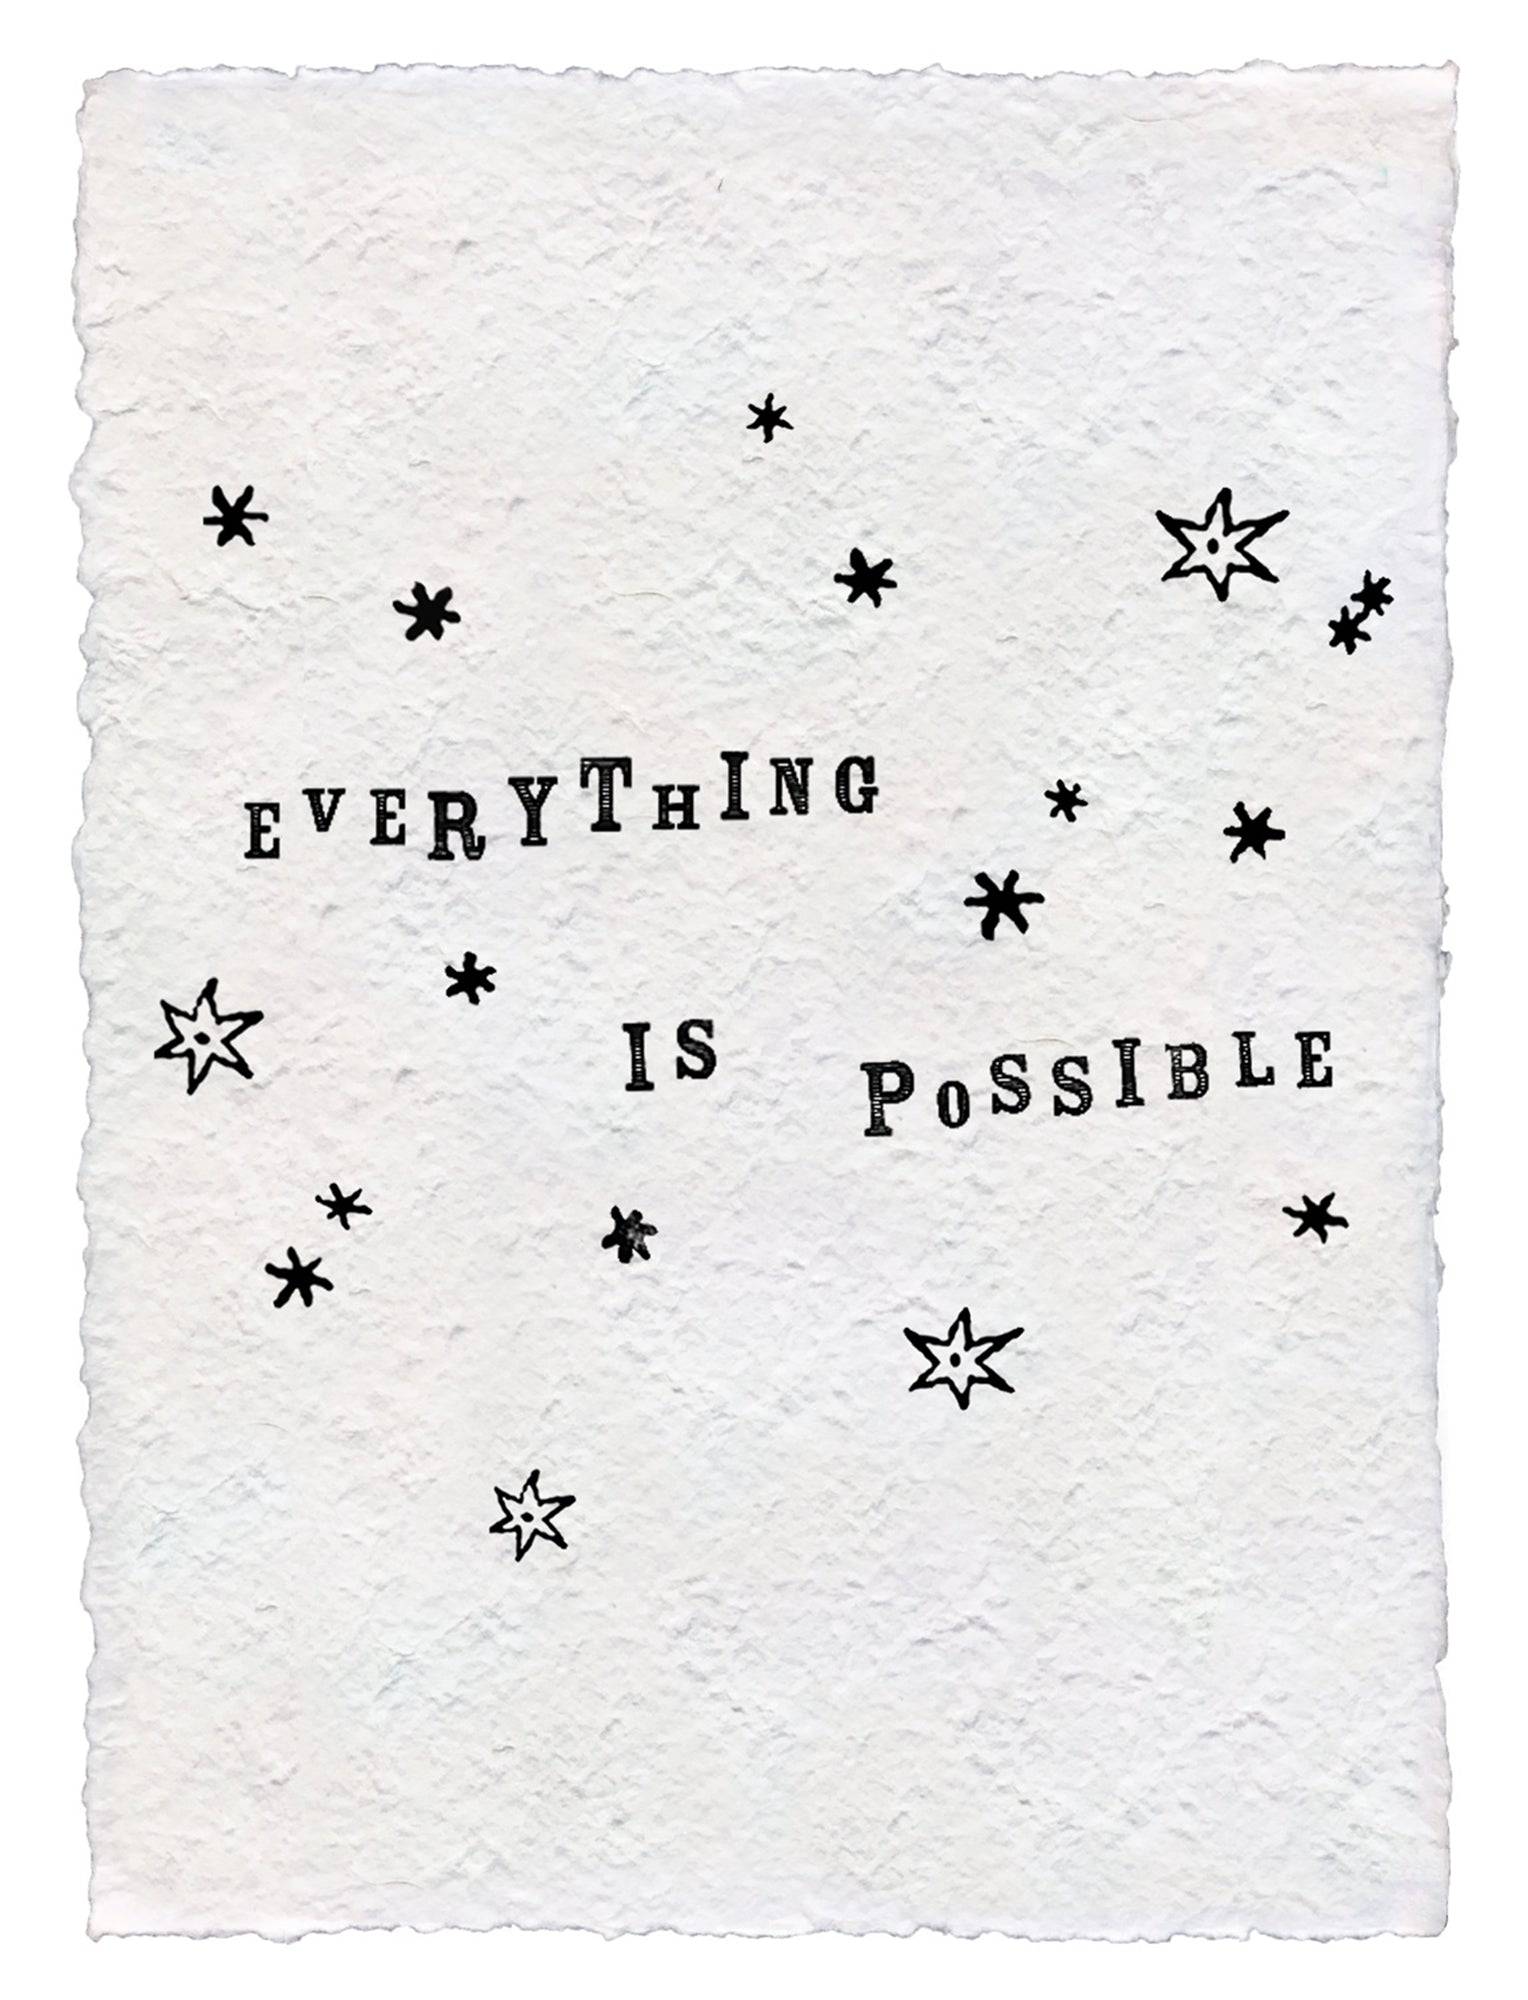 Handmade Paper Print Everything is Possible - Twinkle Twinkle Little One